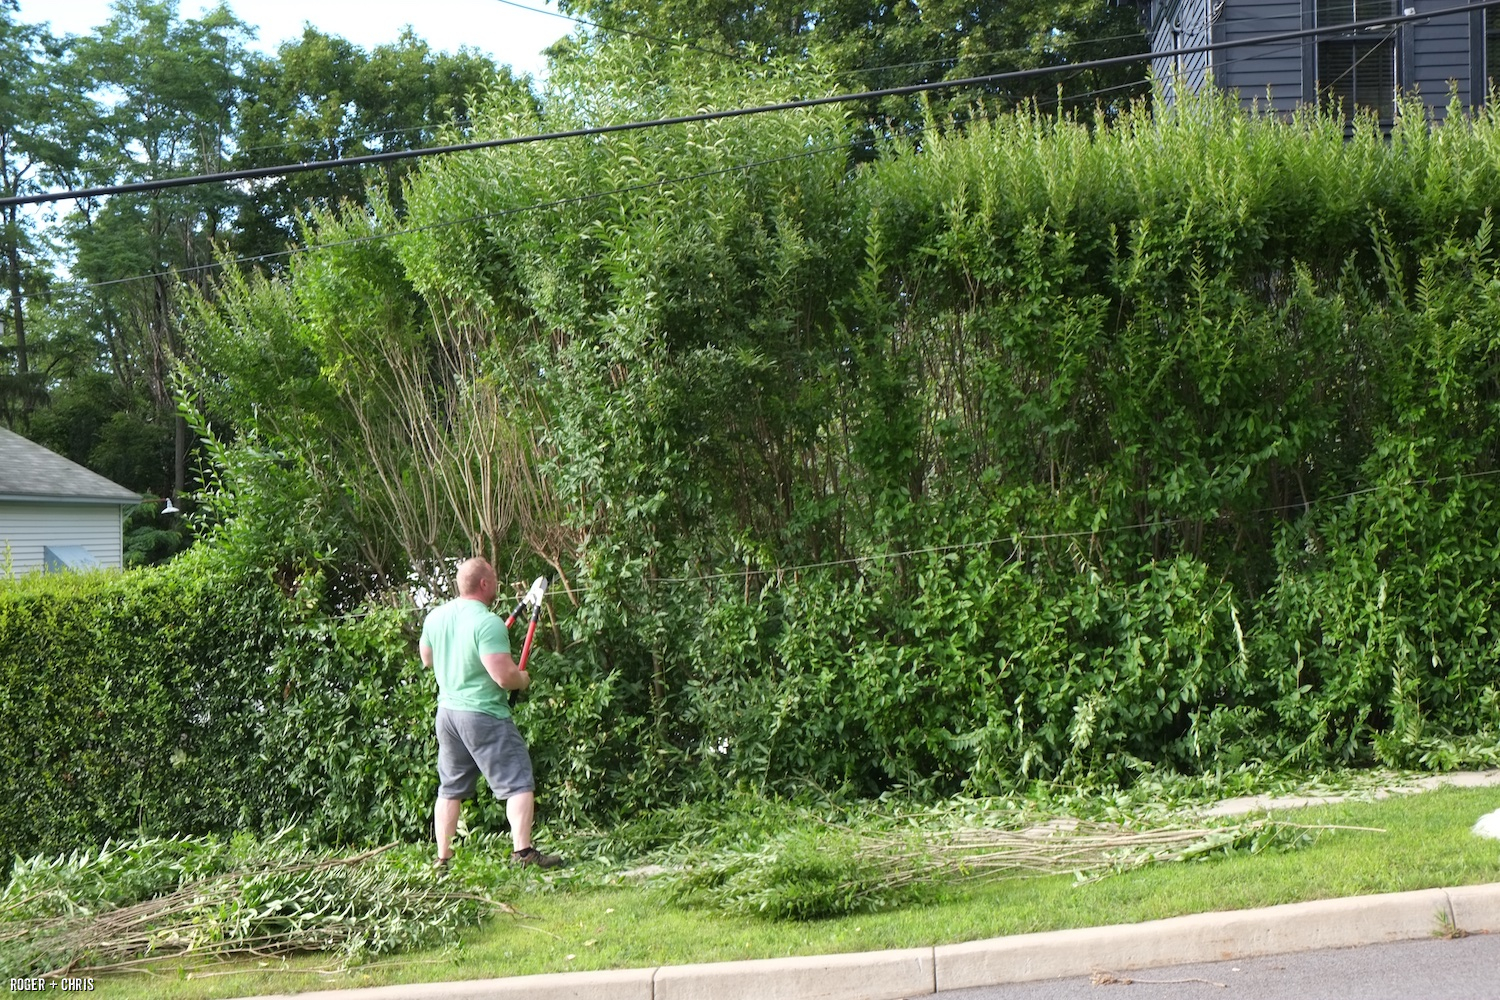 Roger tames the hedge.